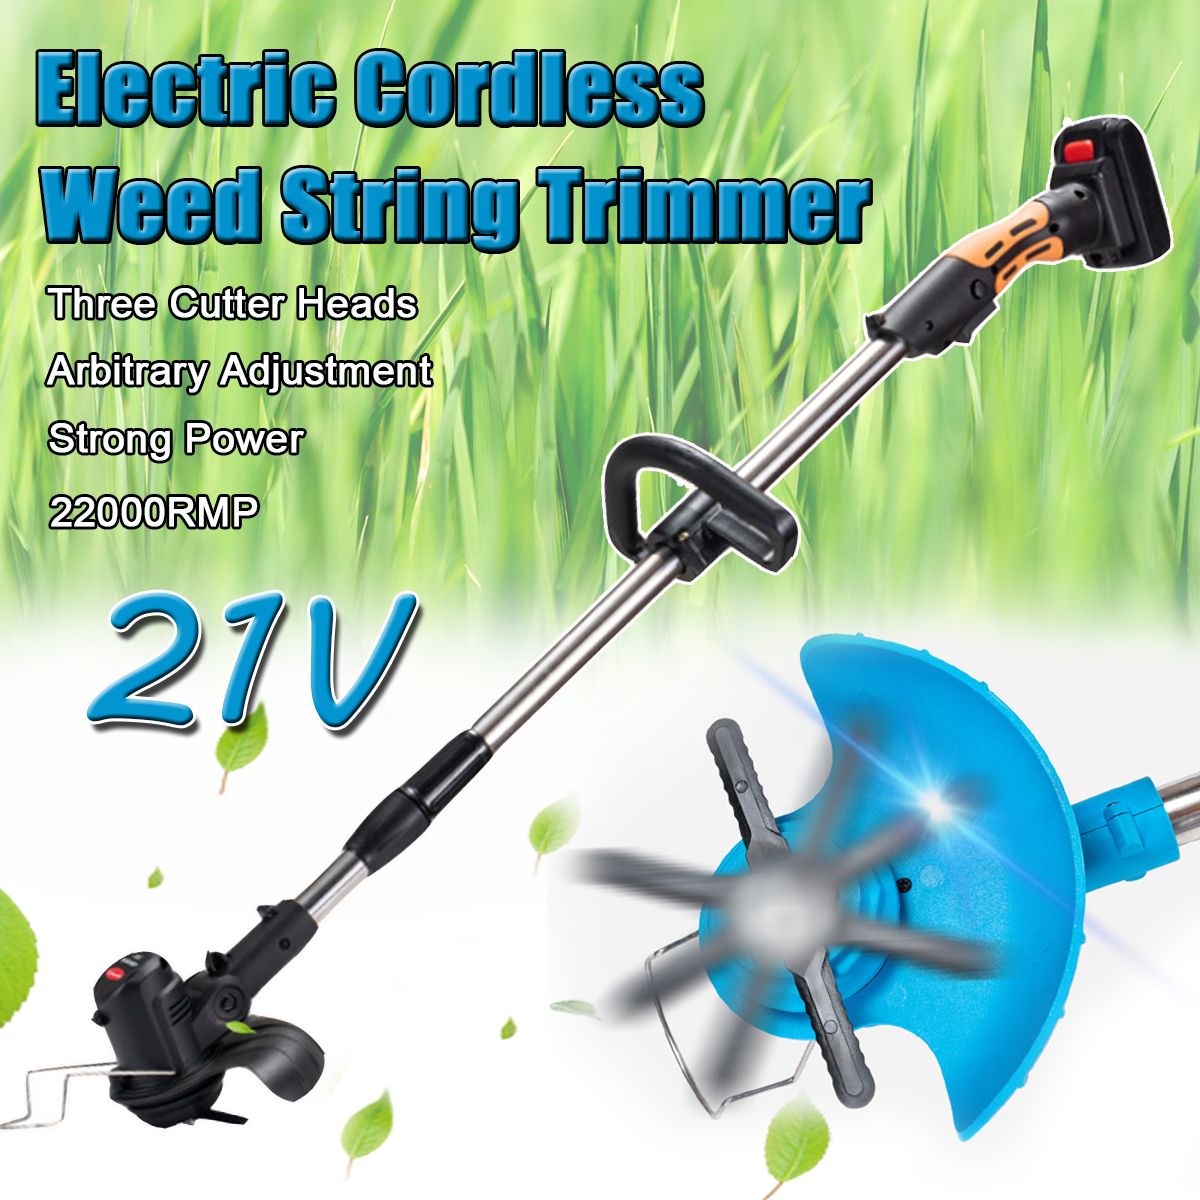 21V-Electric-Grass-Weeds-Lawn-Trimmer-Industrial-Lawn-Mowers-Send-Circular-Saw-Blades-And-Blades-1767300